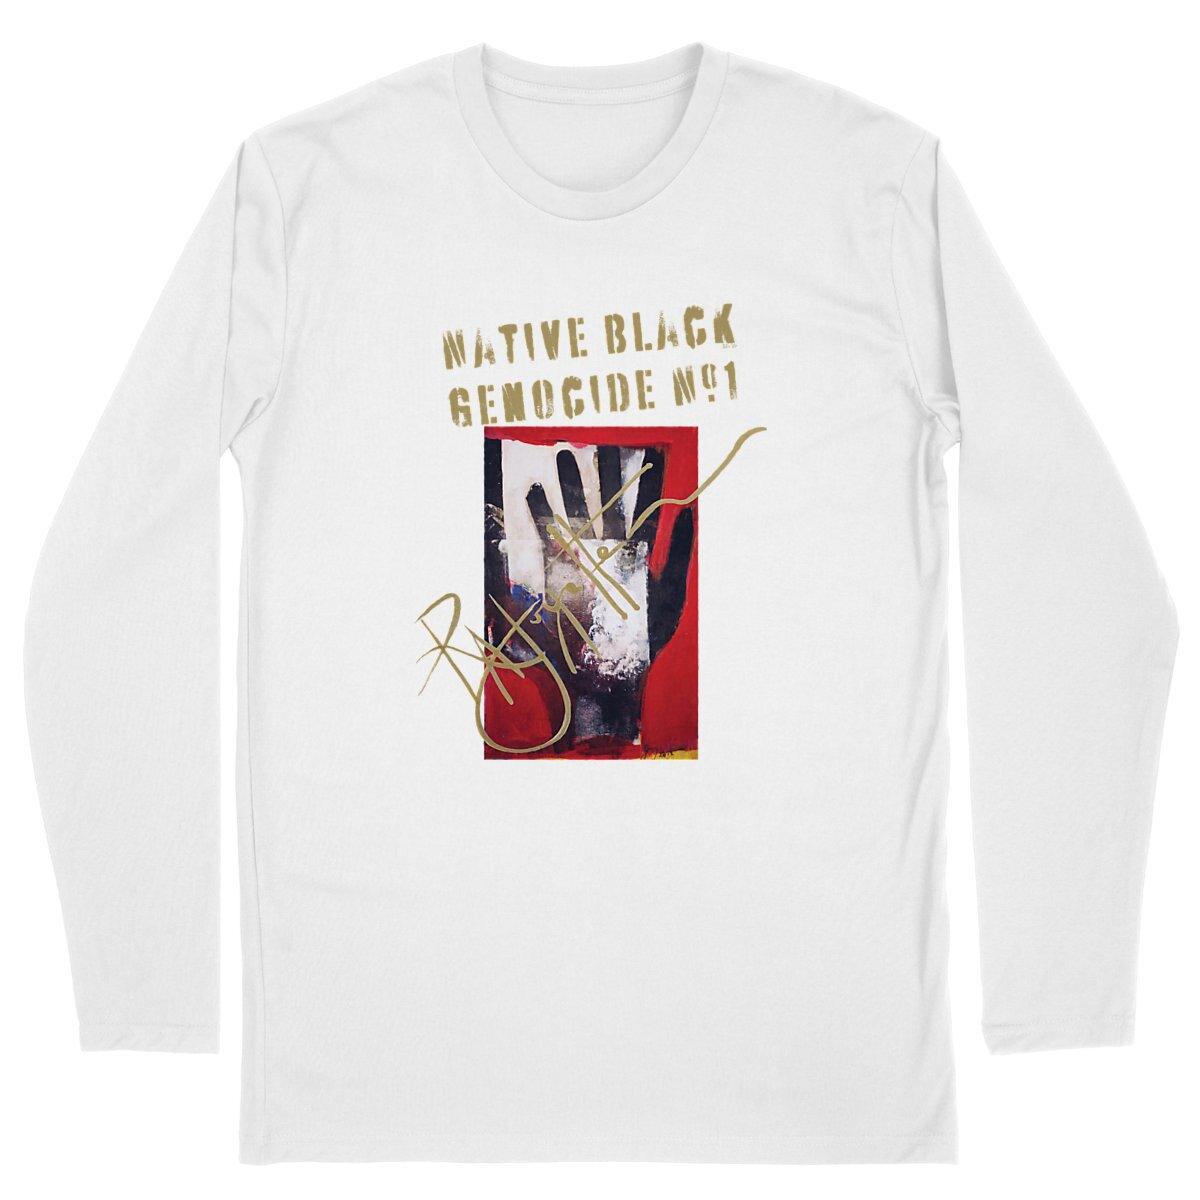 Native Black Genocide #1 Premium Men's Long Sleeve, crafted from 100% organic cotton, supports environmental and social causes, by Tree of Life Art.